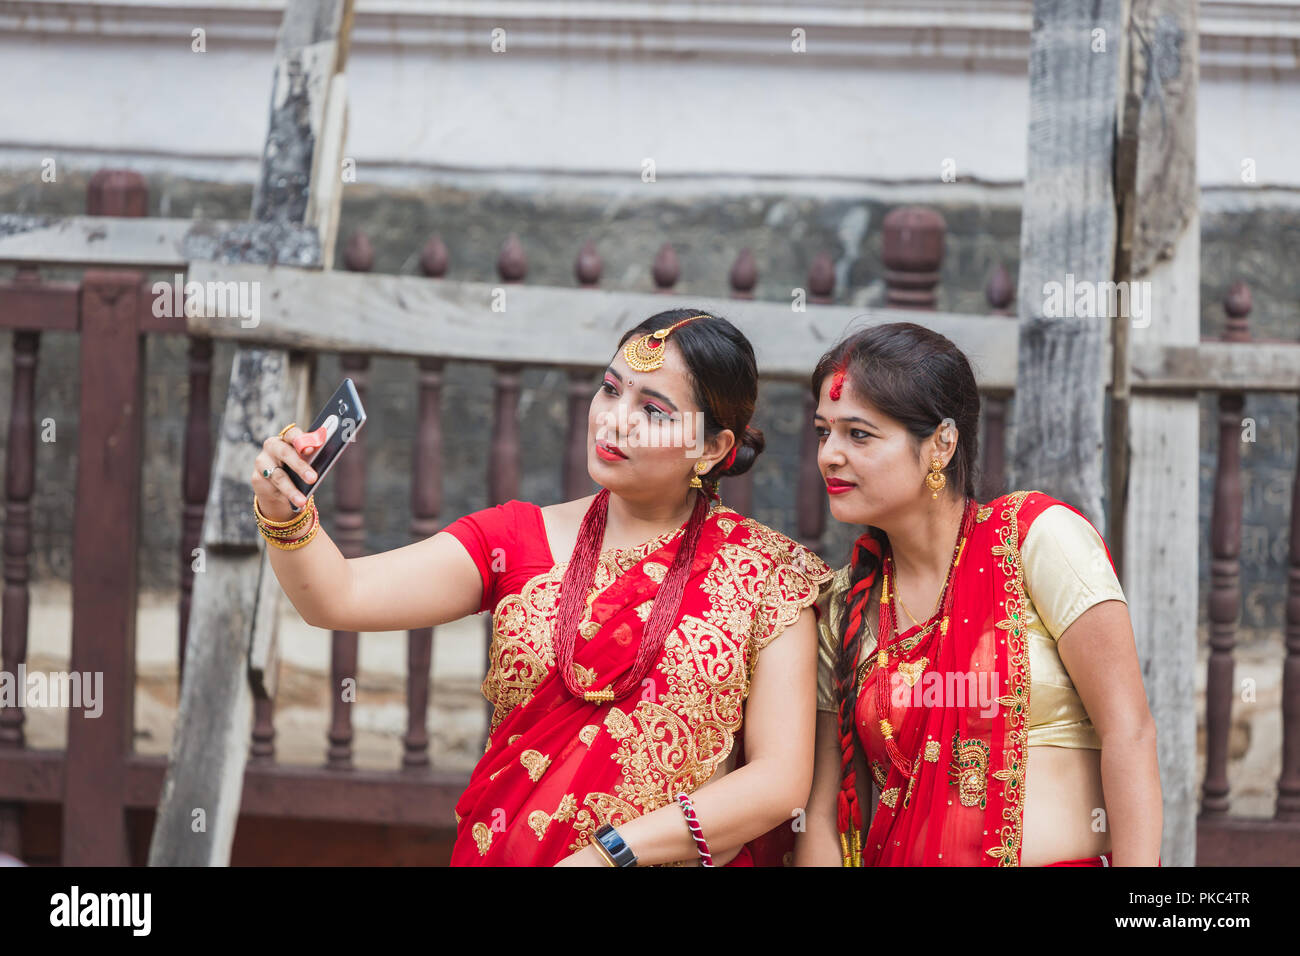 Kathmandu,Nepal - Sep 12,2018: Nepali Women take selfies with Smartphone at Teej Festival in Kathmandu.Hindu Nepali Women fast and wish for a prosperous life of their spouse and family on this festival.The festivals for women, include dancing, singing, getting together with friends,, wearing red, green or orange clothes, sharing festive foods Credit: Nabaraj Regmi/Alamy Live News Stock Photo